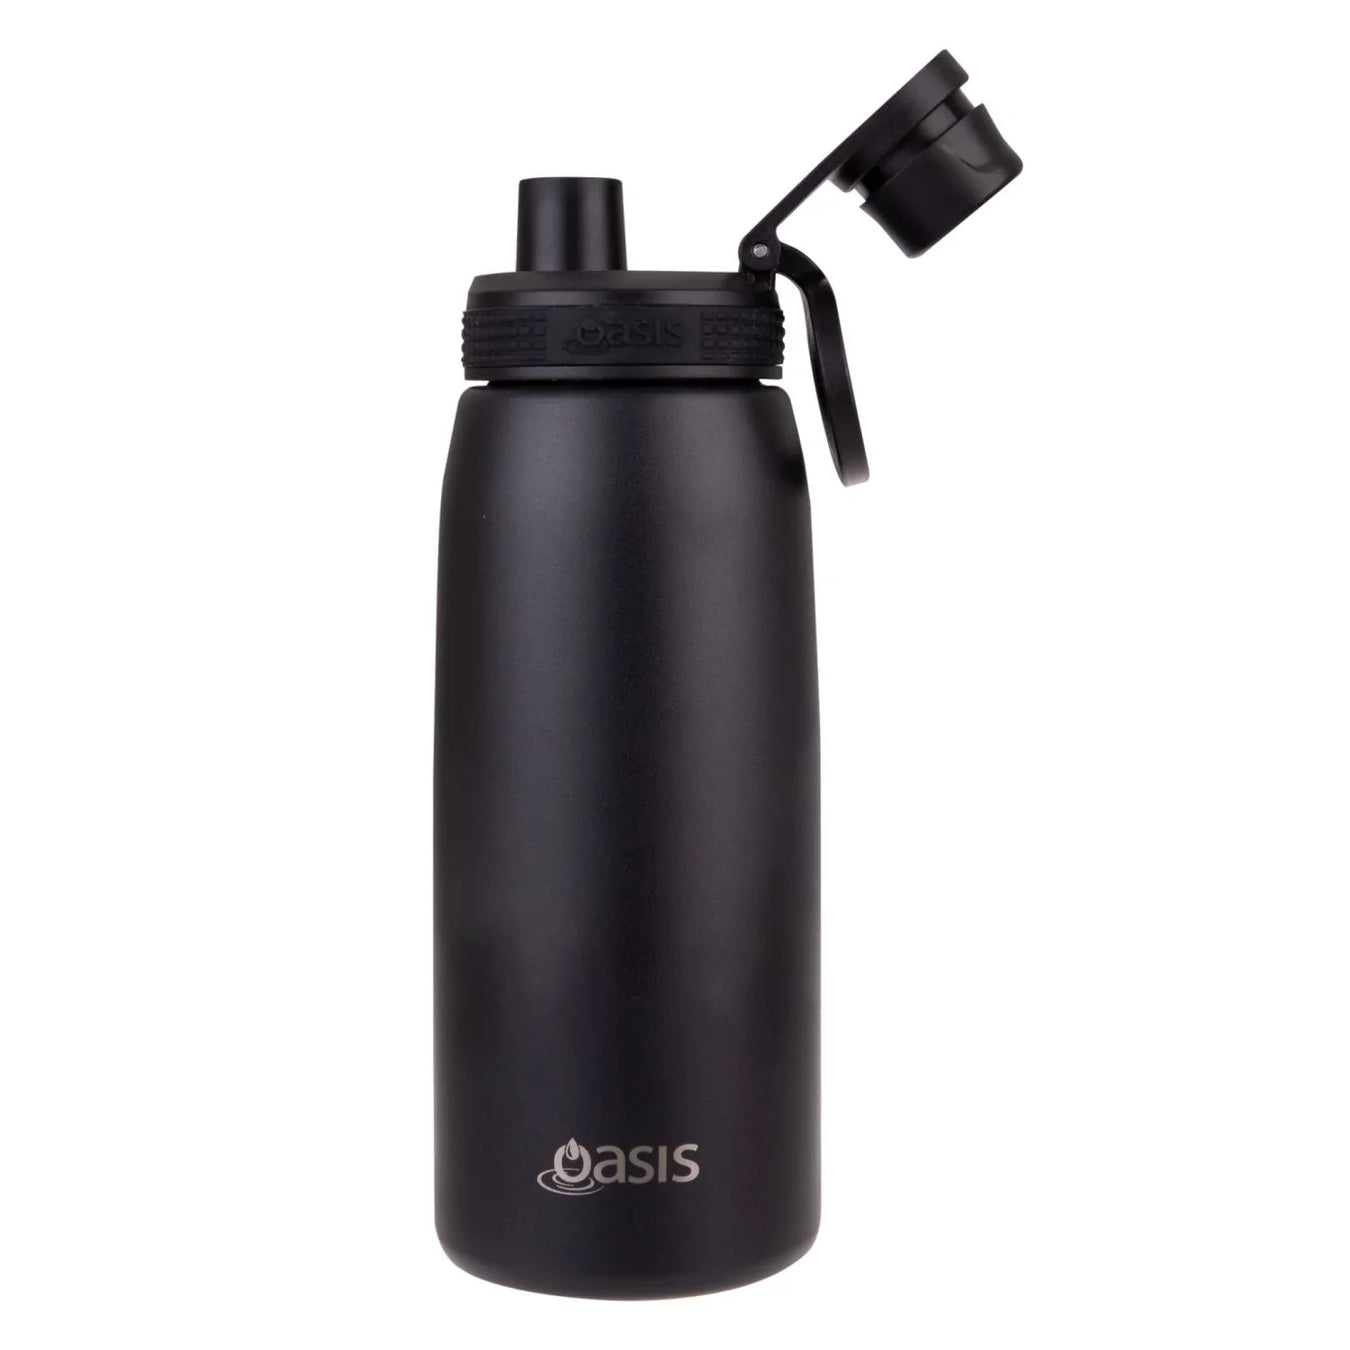 Oasis' Insulated Tumblers